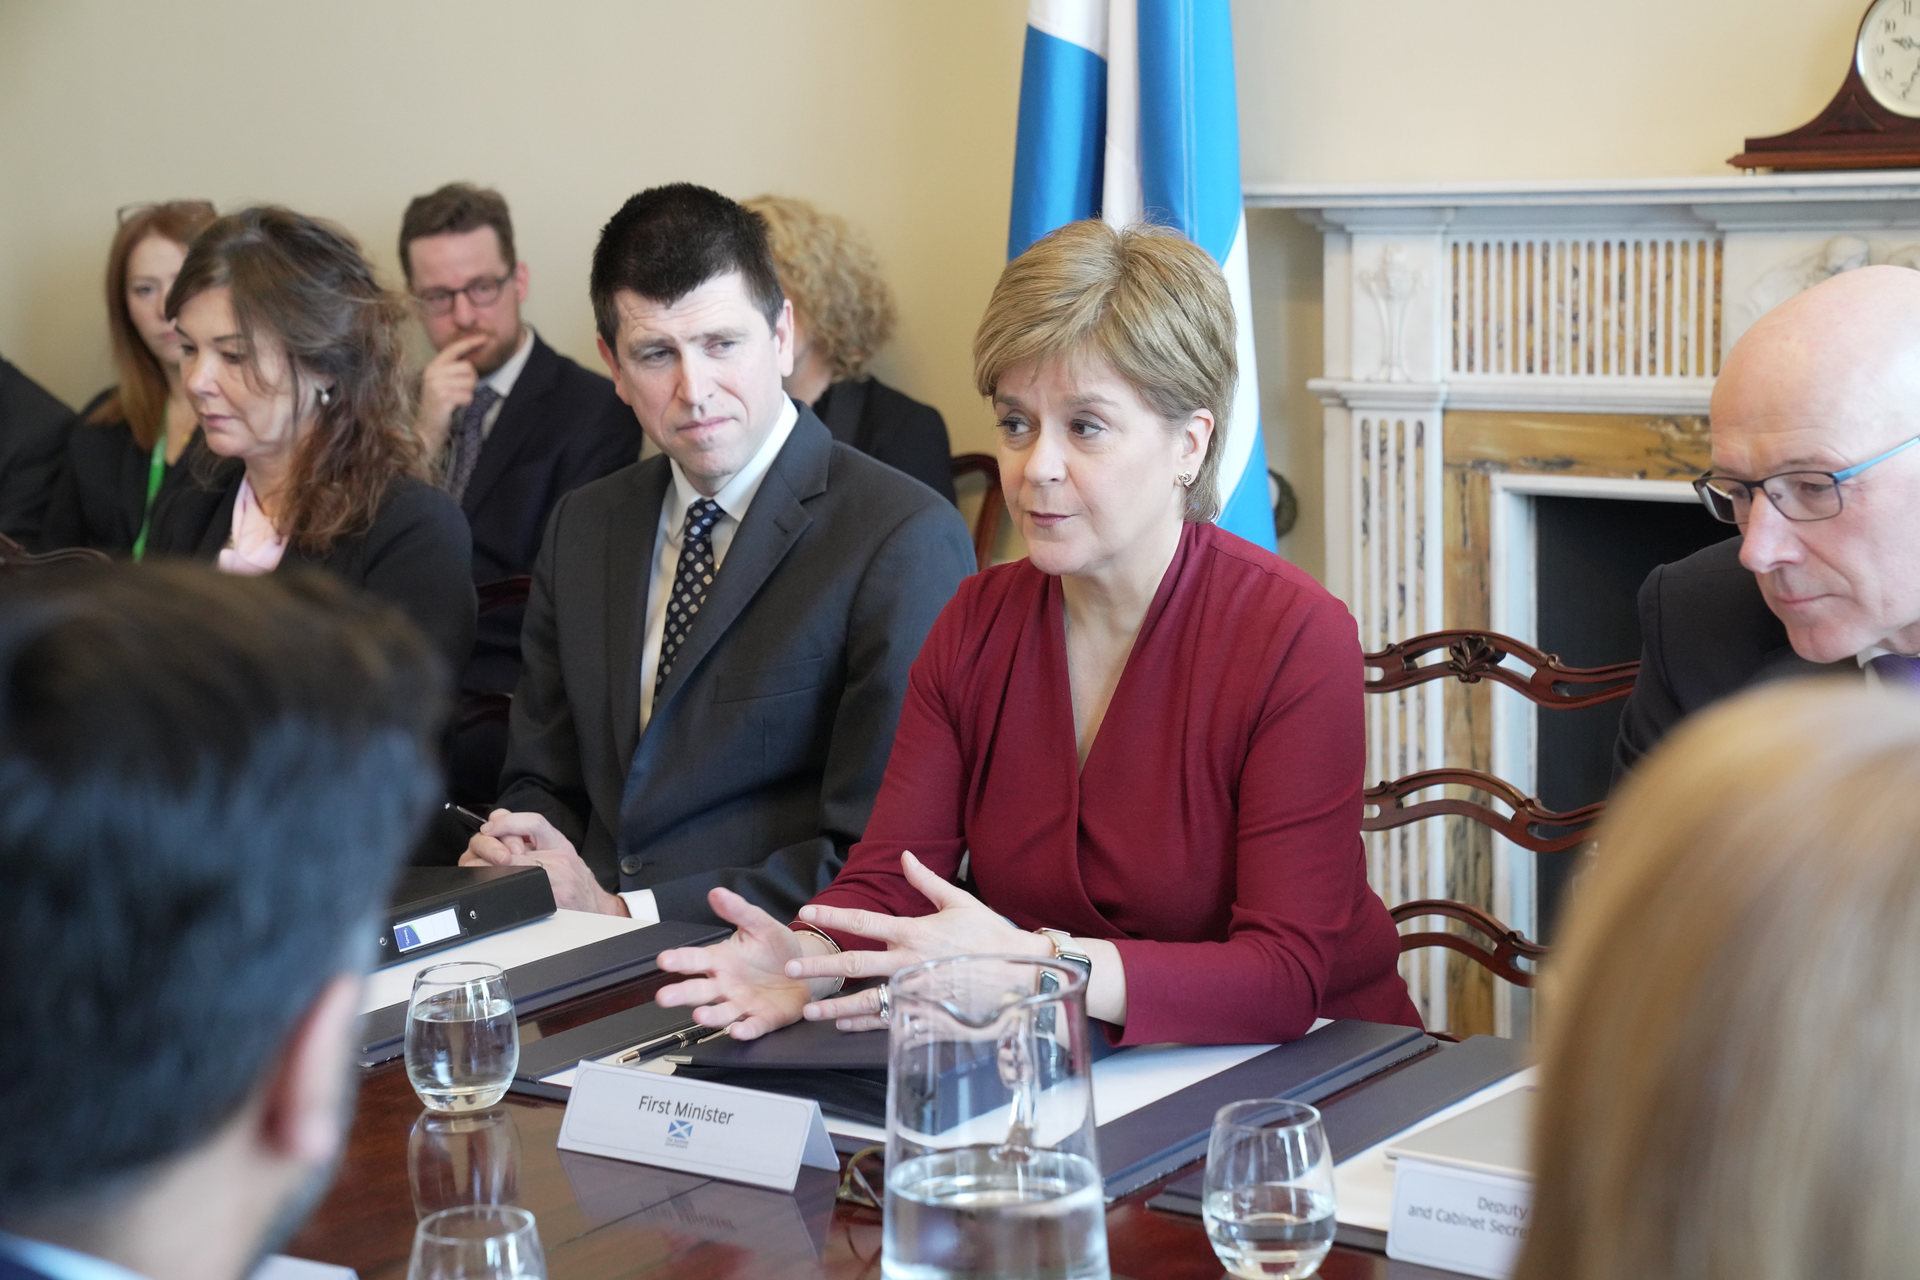 Nicola Sturgeon will step down officially as First Minister on Monday.